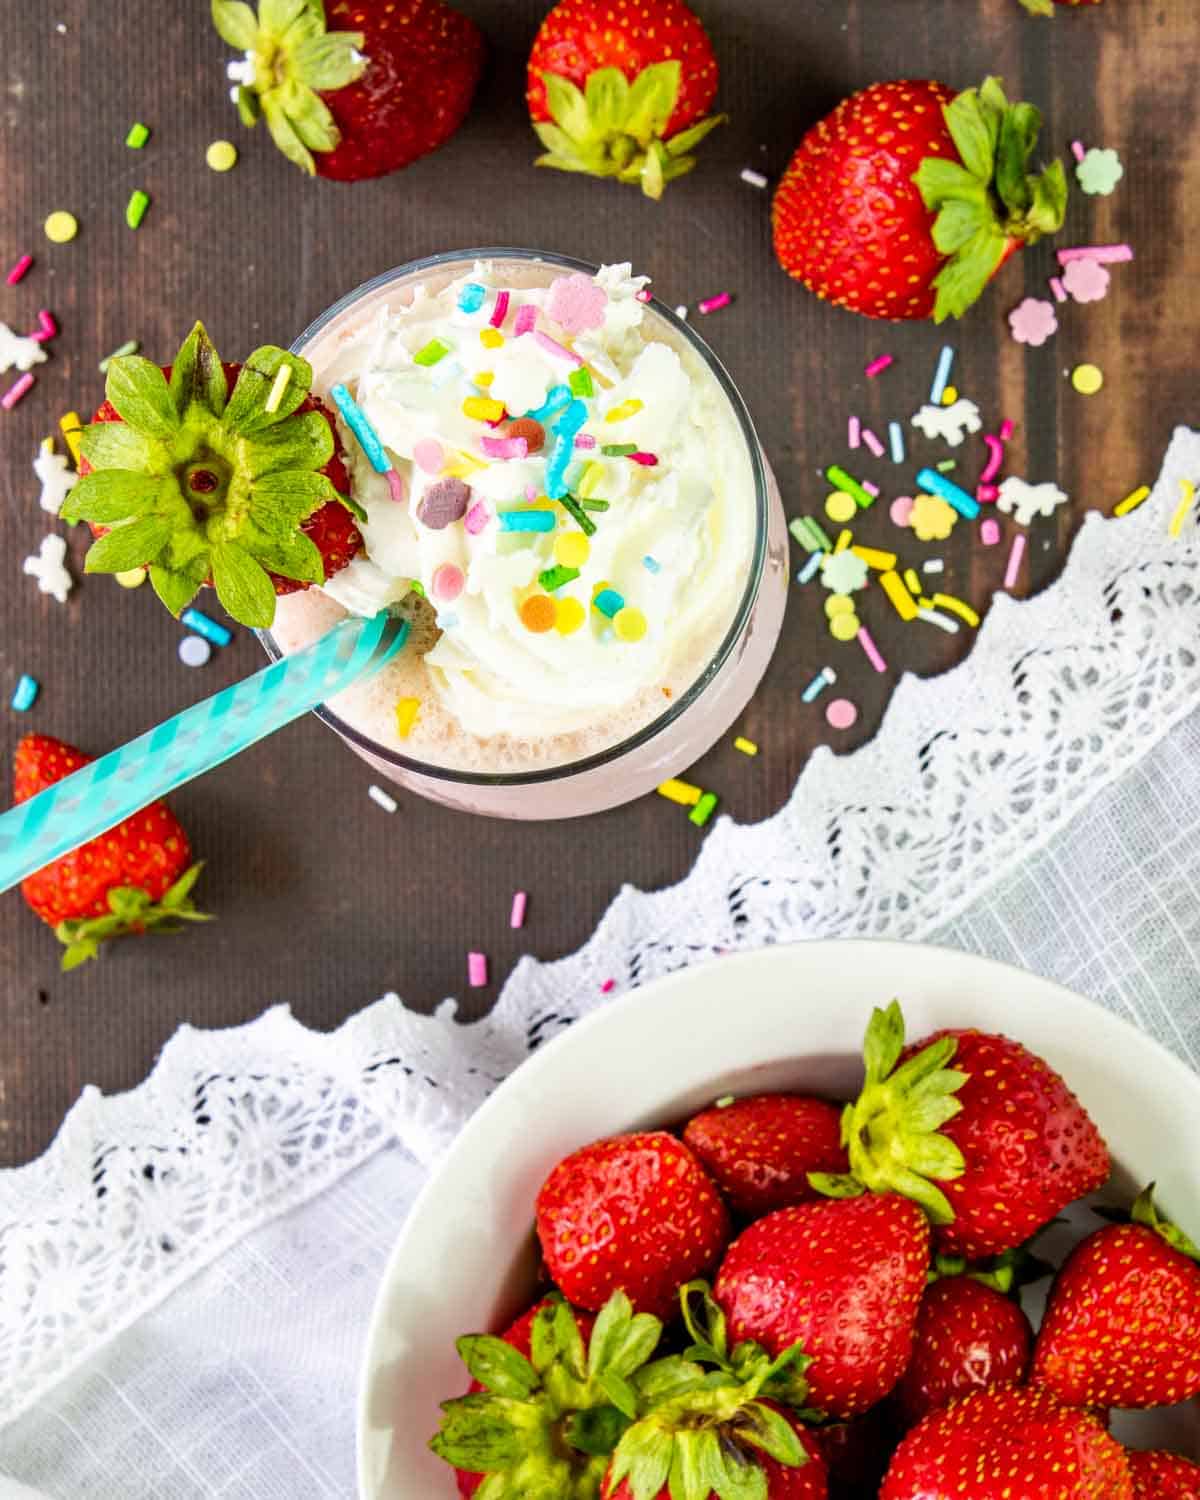 strawberry milkshake topped with whipped cream and sprinkles.